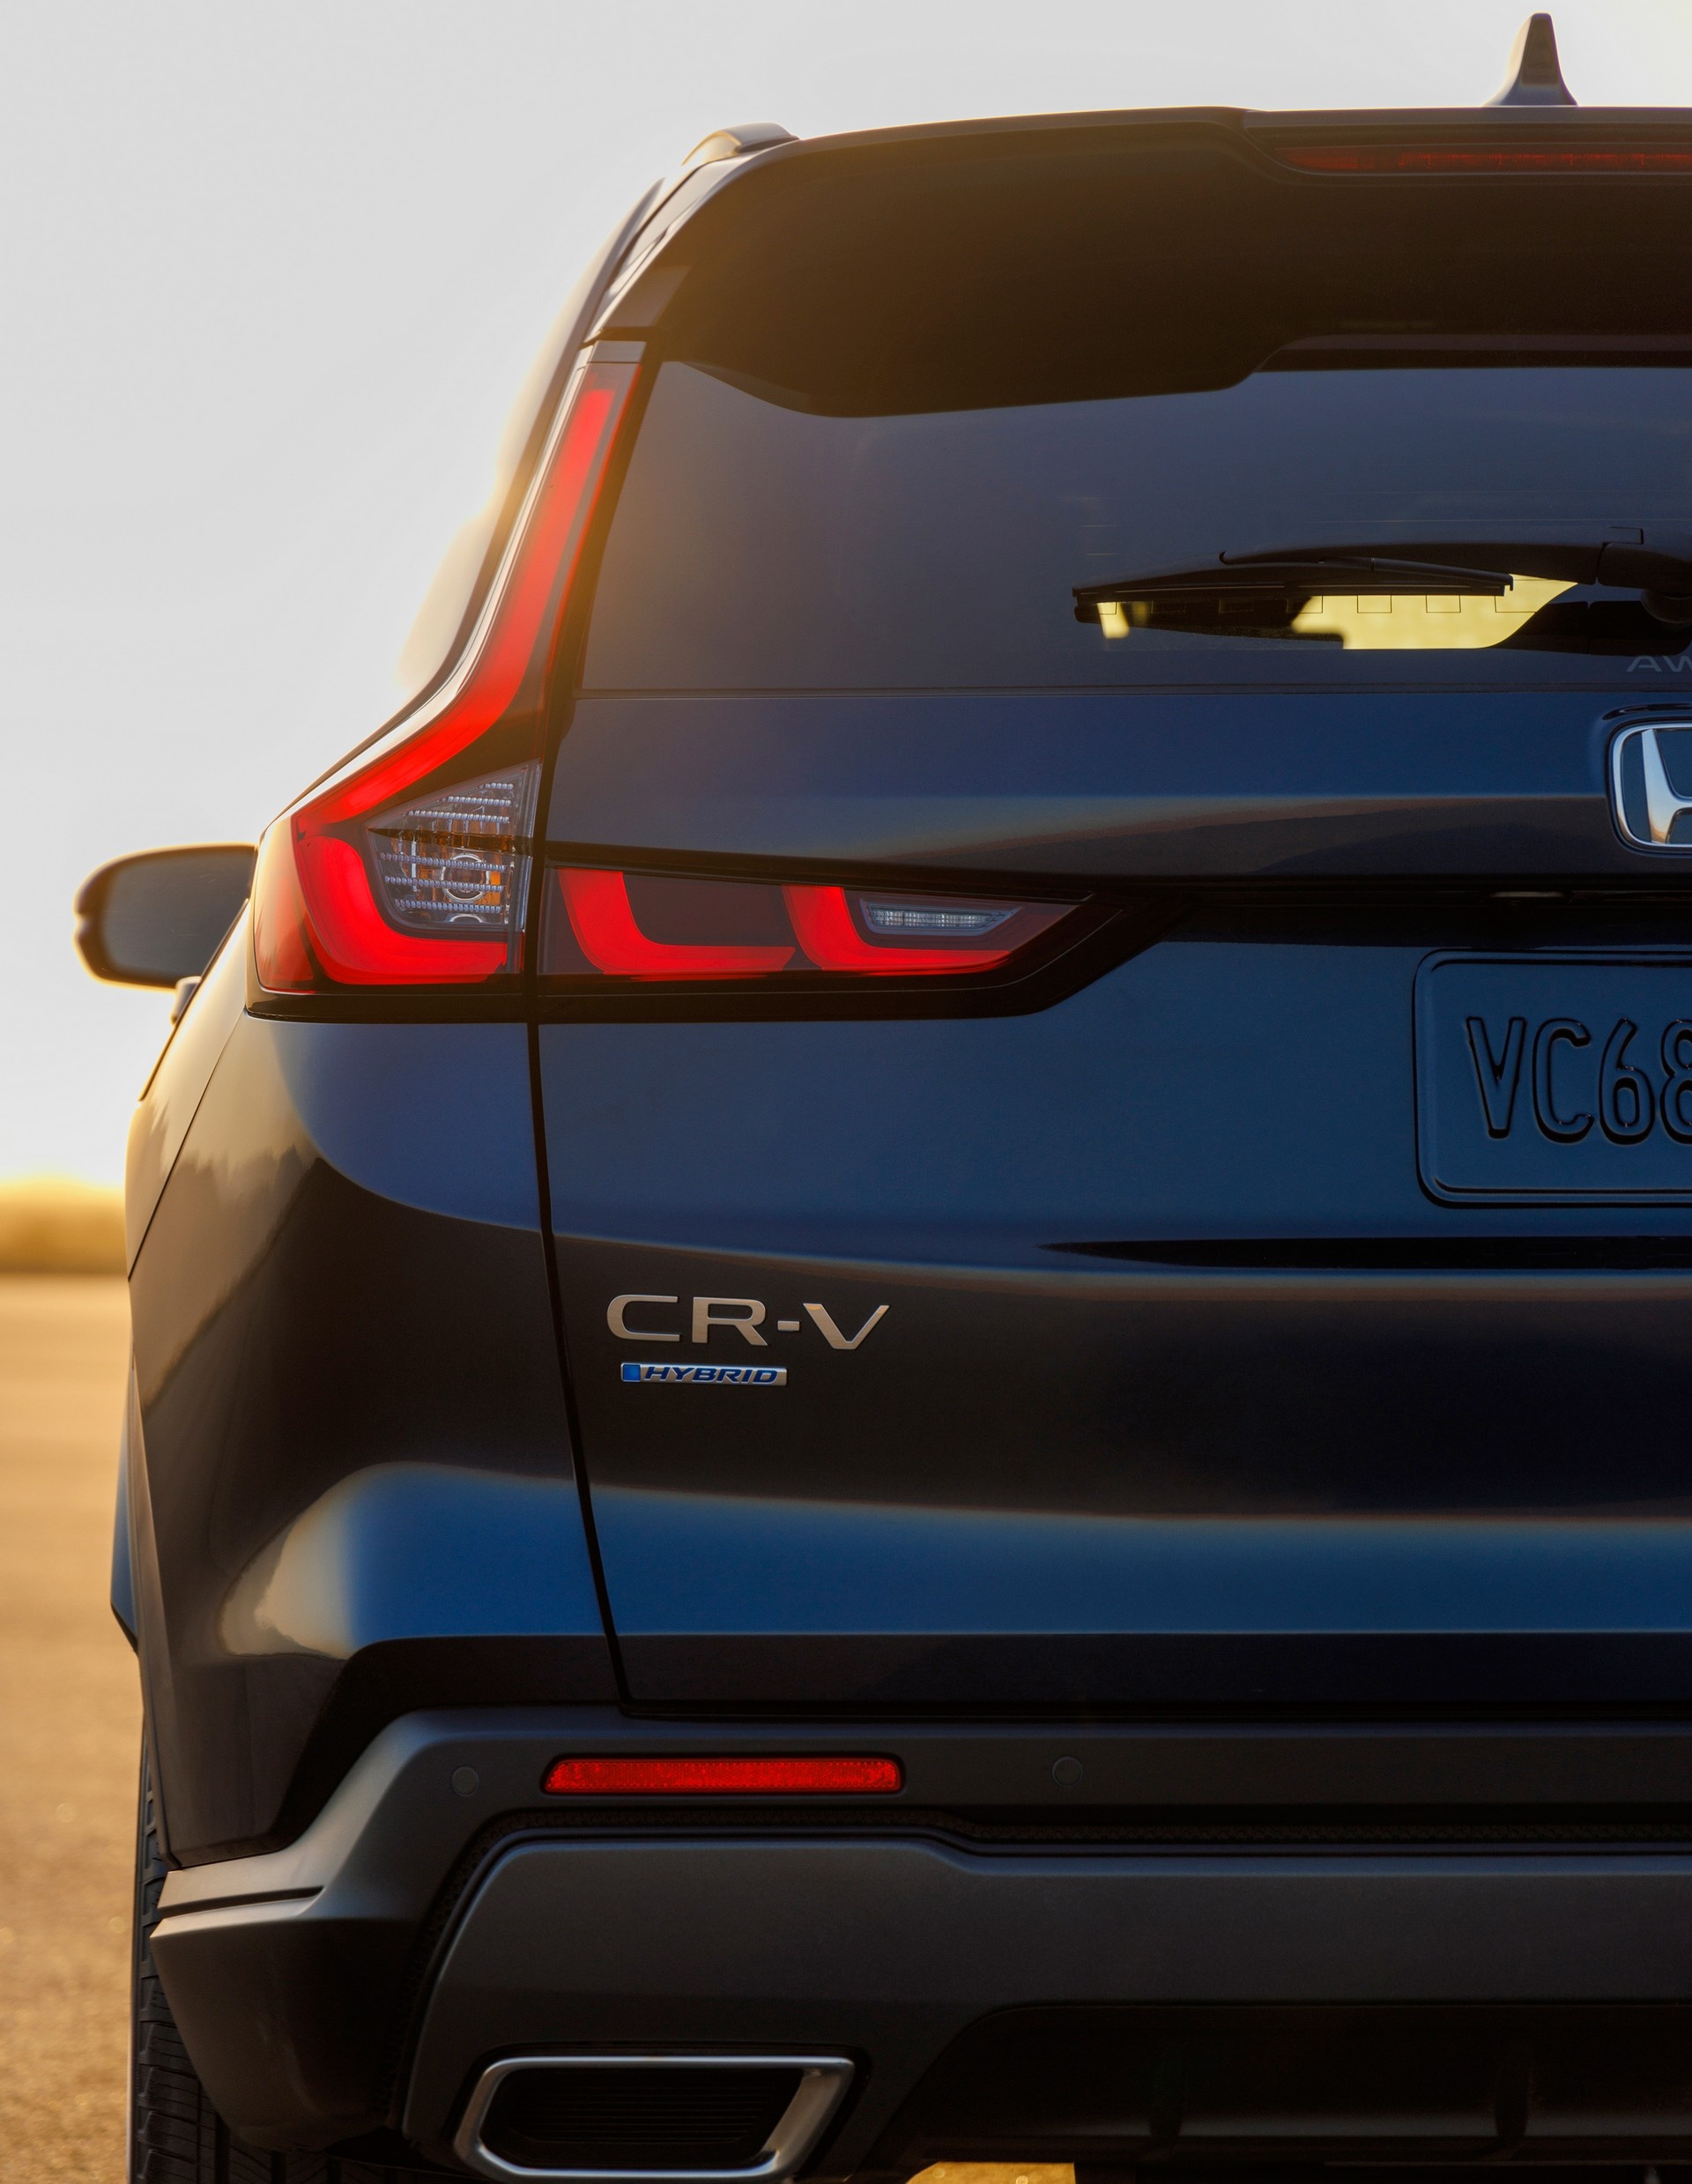 Honda CR-V, New model release, Exciting features, Futuristic design, 1920x2480 HD Phone